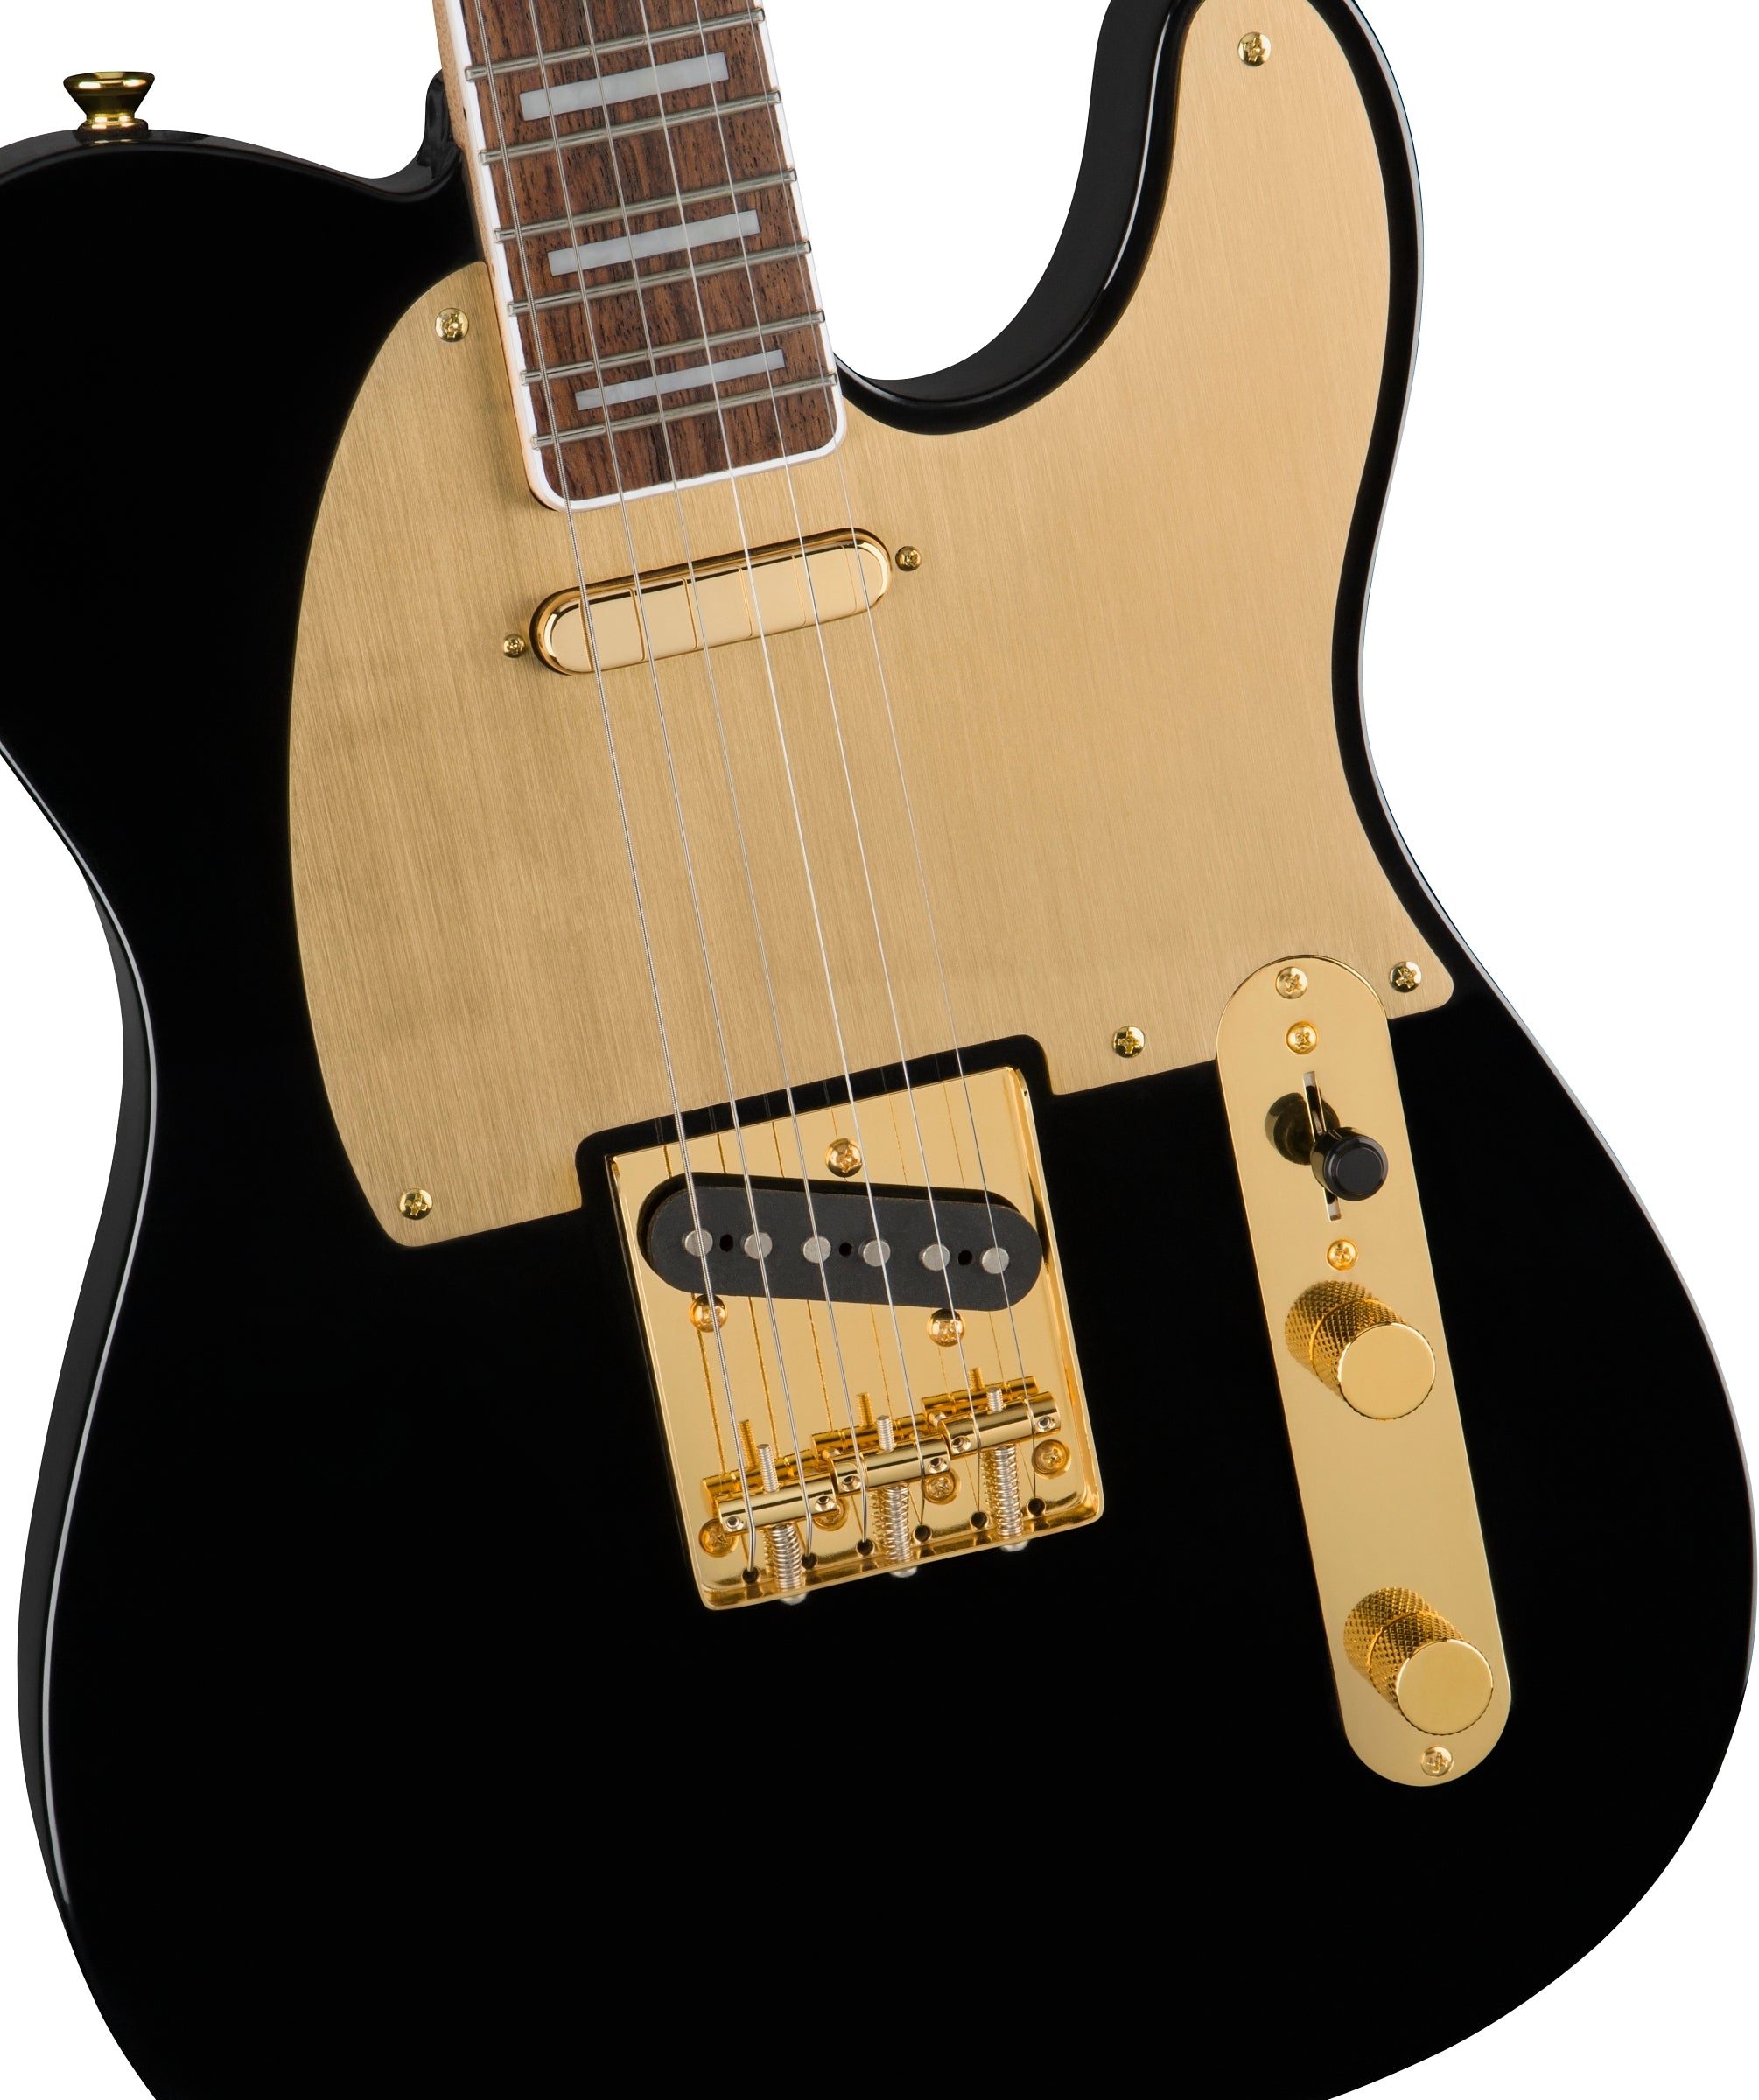 Squier 40th Anniversary Gold Edition Telecaster Electric Guitar - Black